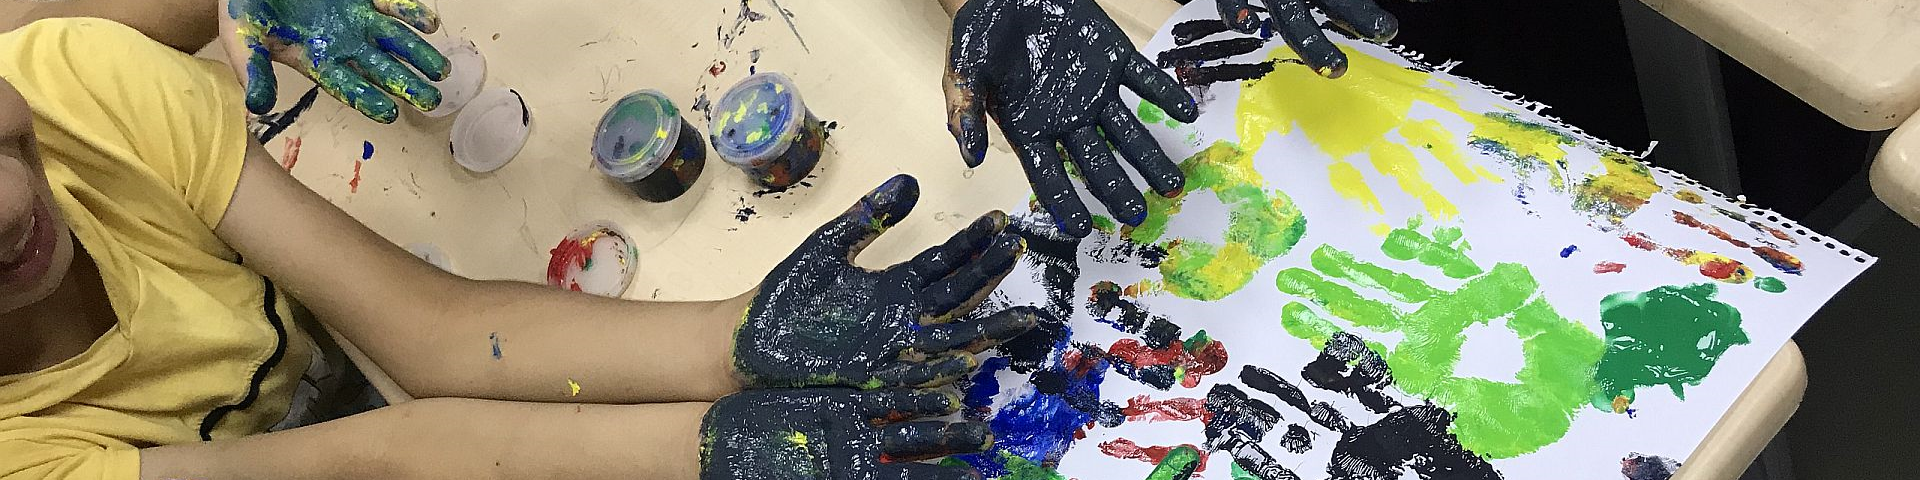 Children paint with their hands.